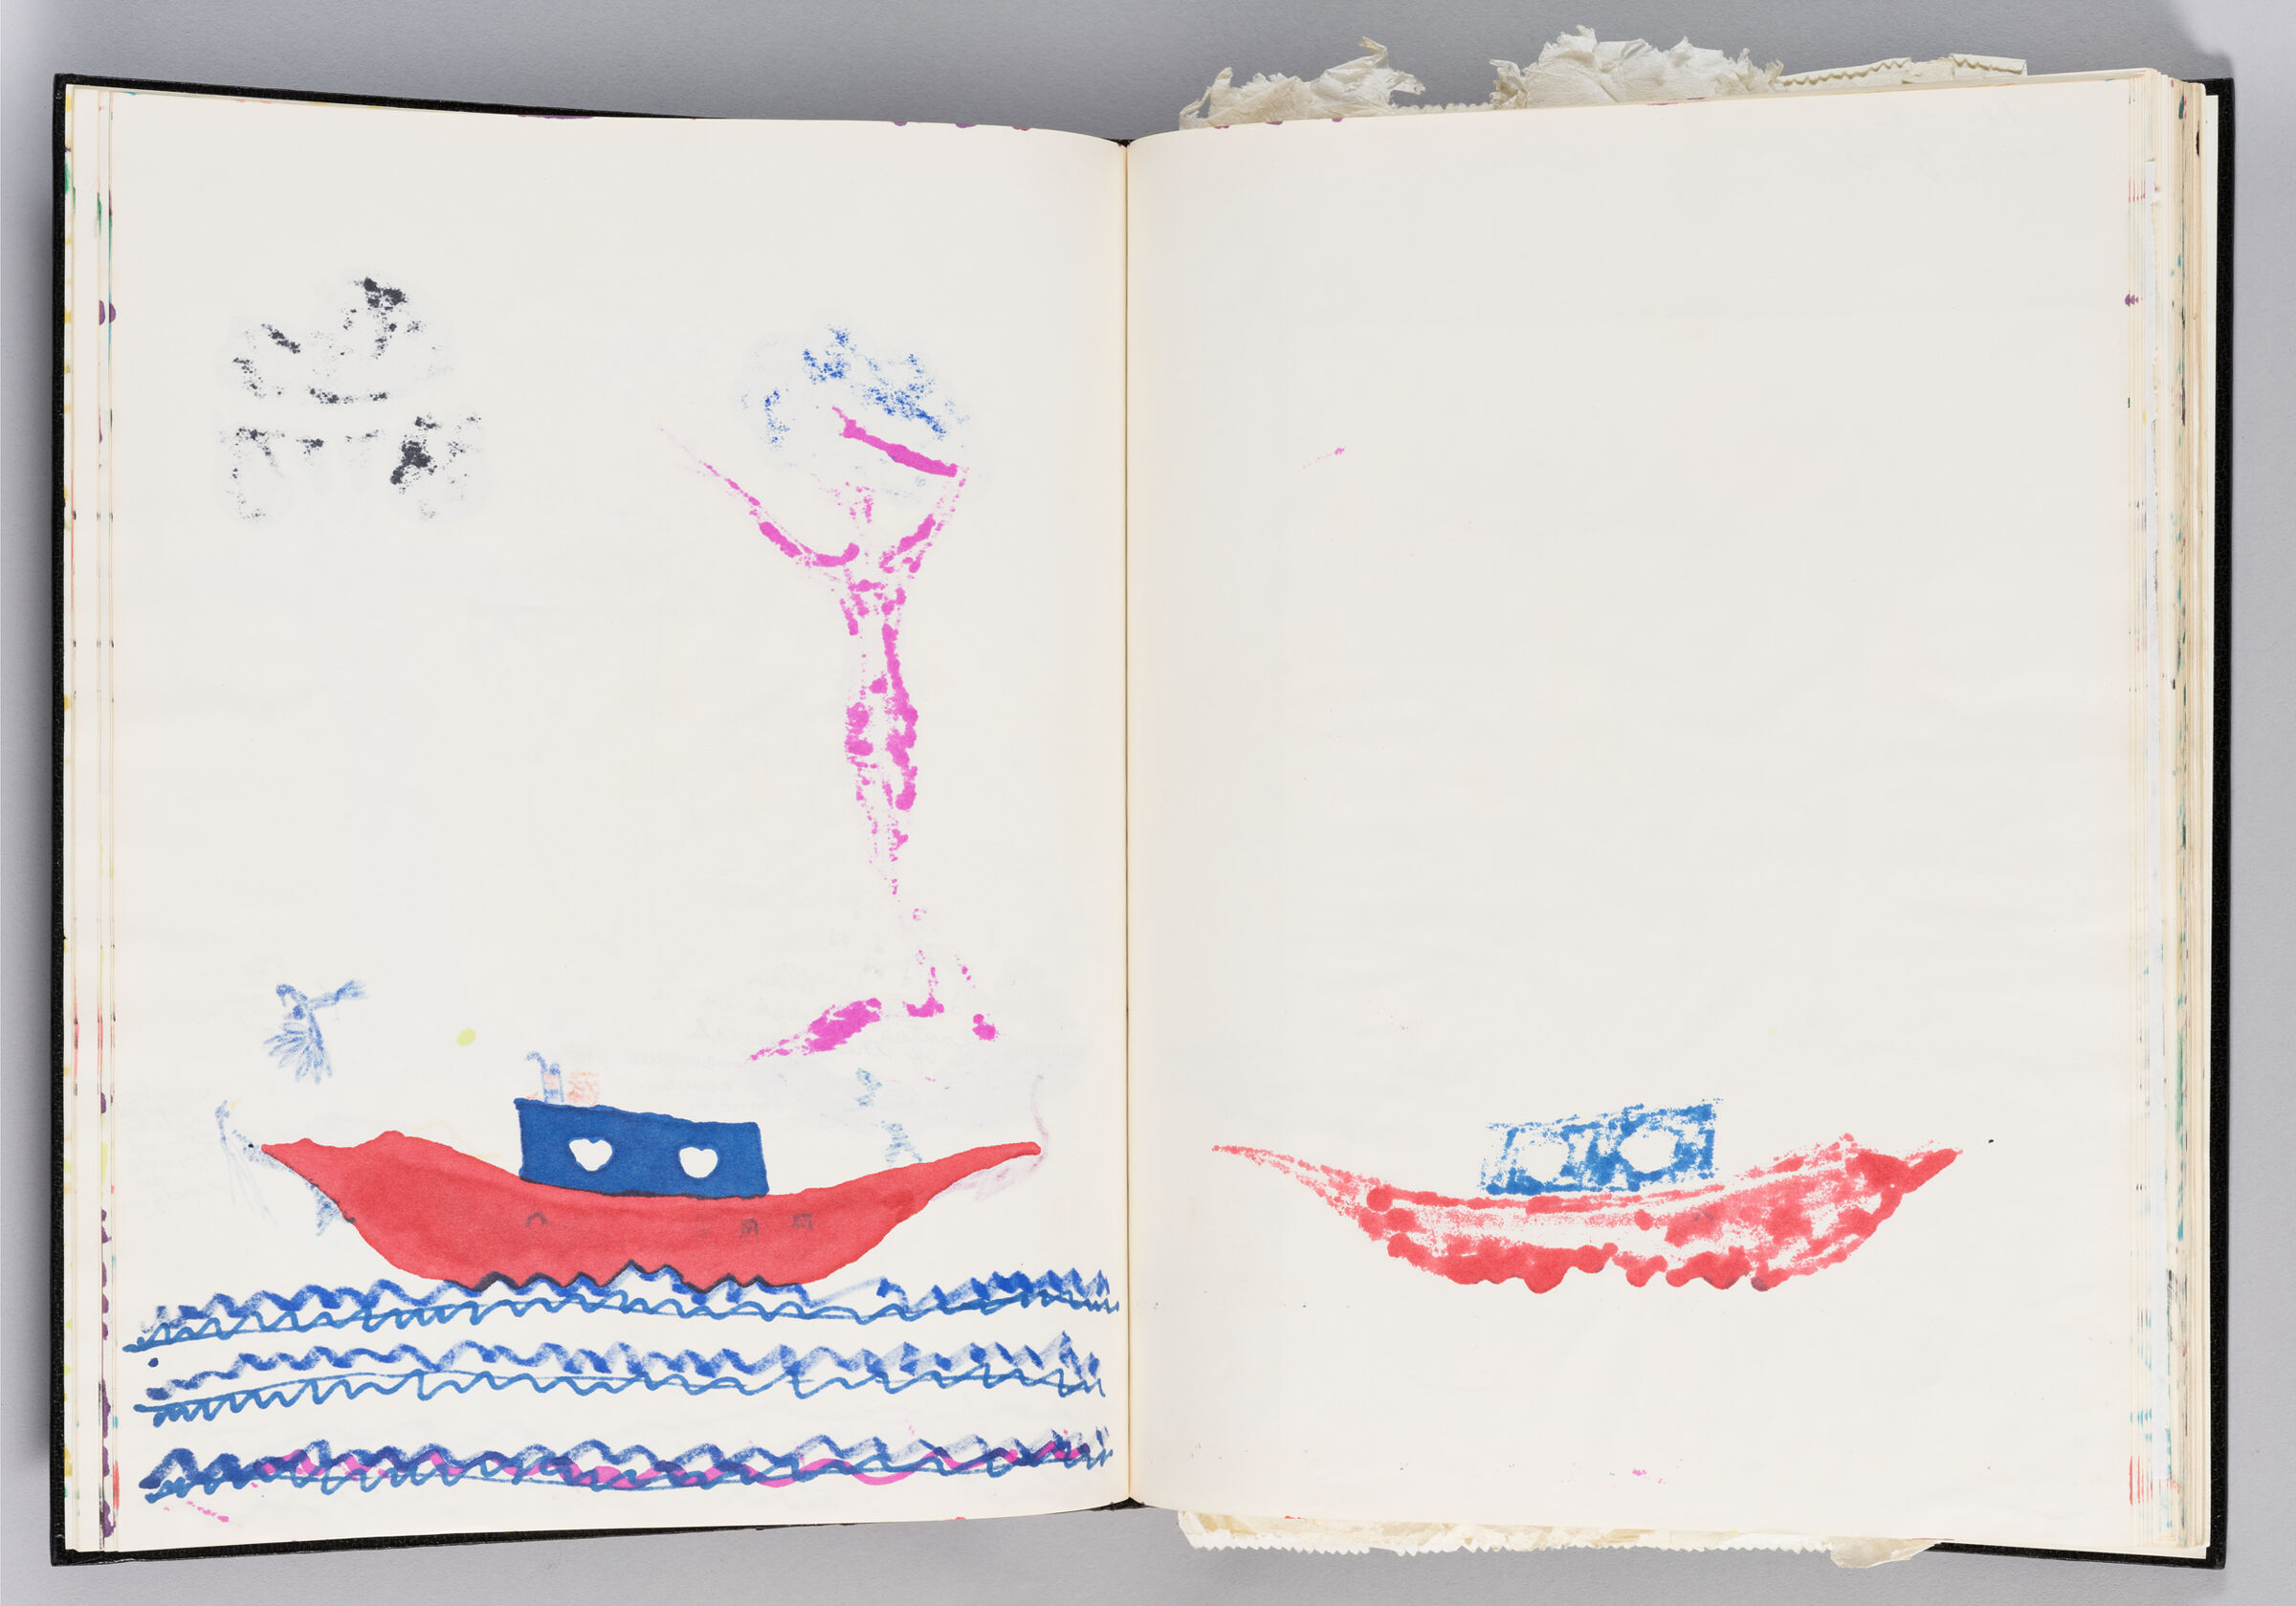 Untitled (Children's Drawing And Color Transfer, Left Page); Untitled (Bleed-Through, Right Page)